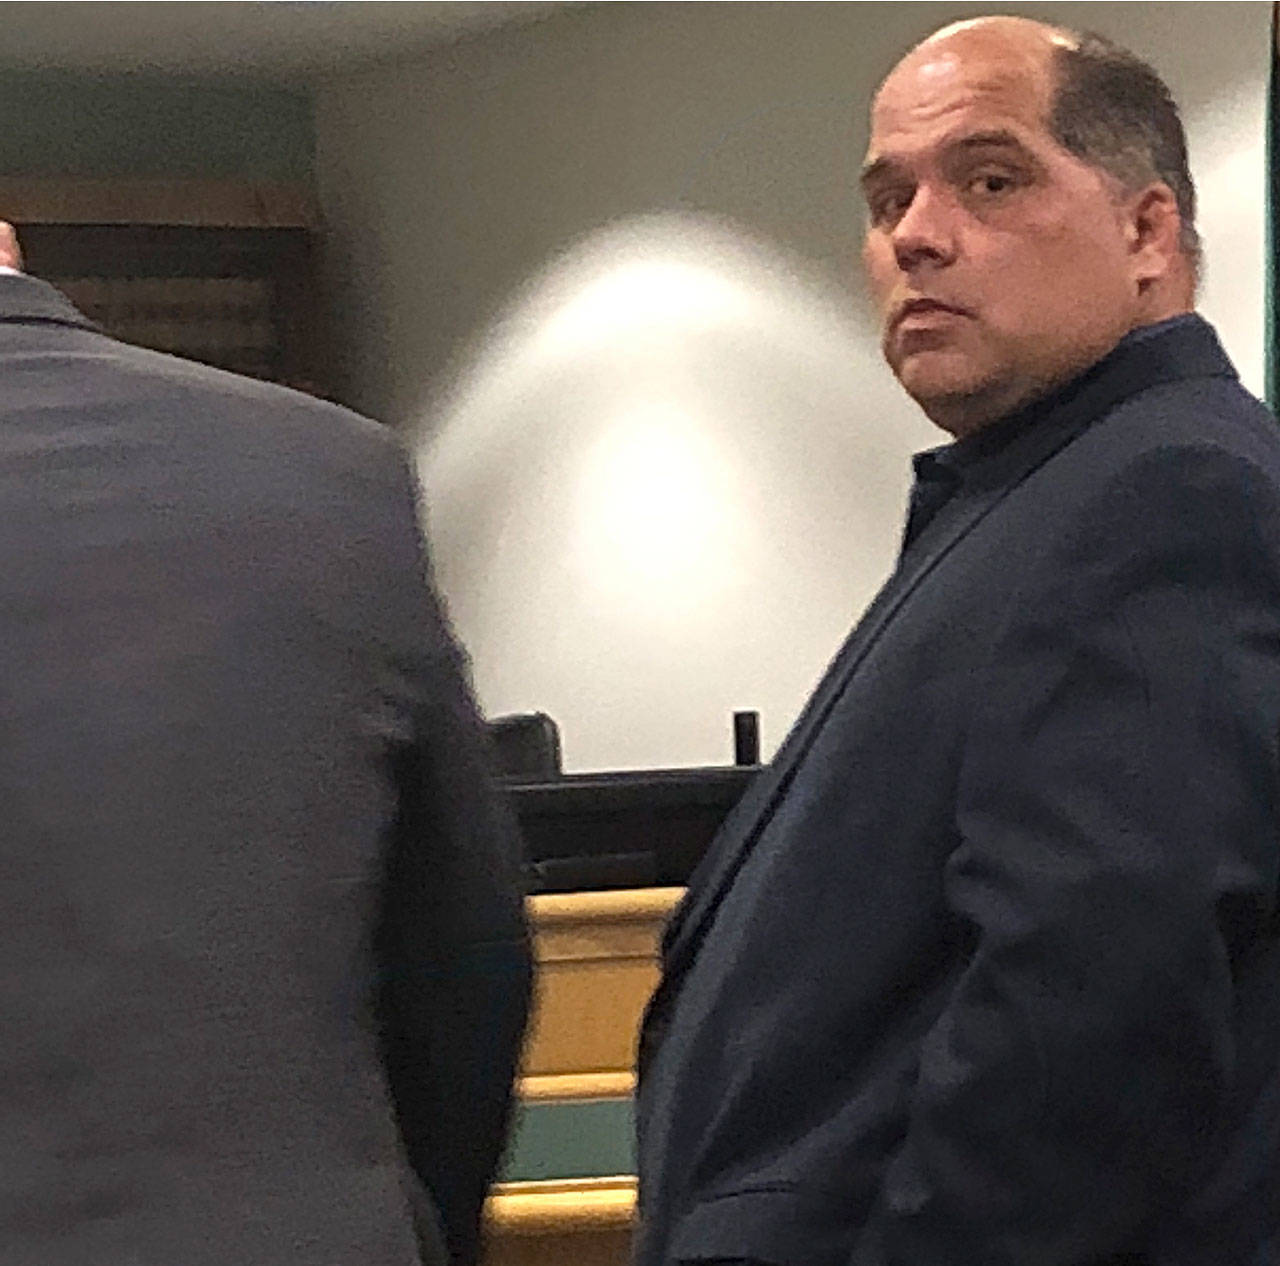 A jury in Island County Superior Court found Bryon Koeller guilty of child molestation charges Monday. (Photo by Jessie Stensland / Whidbey News-Times)